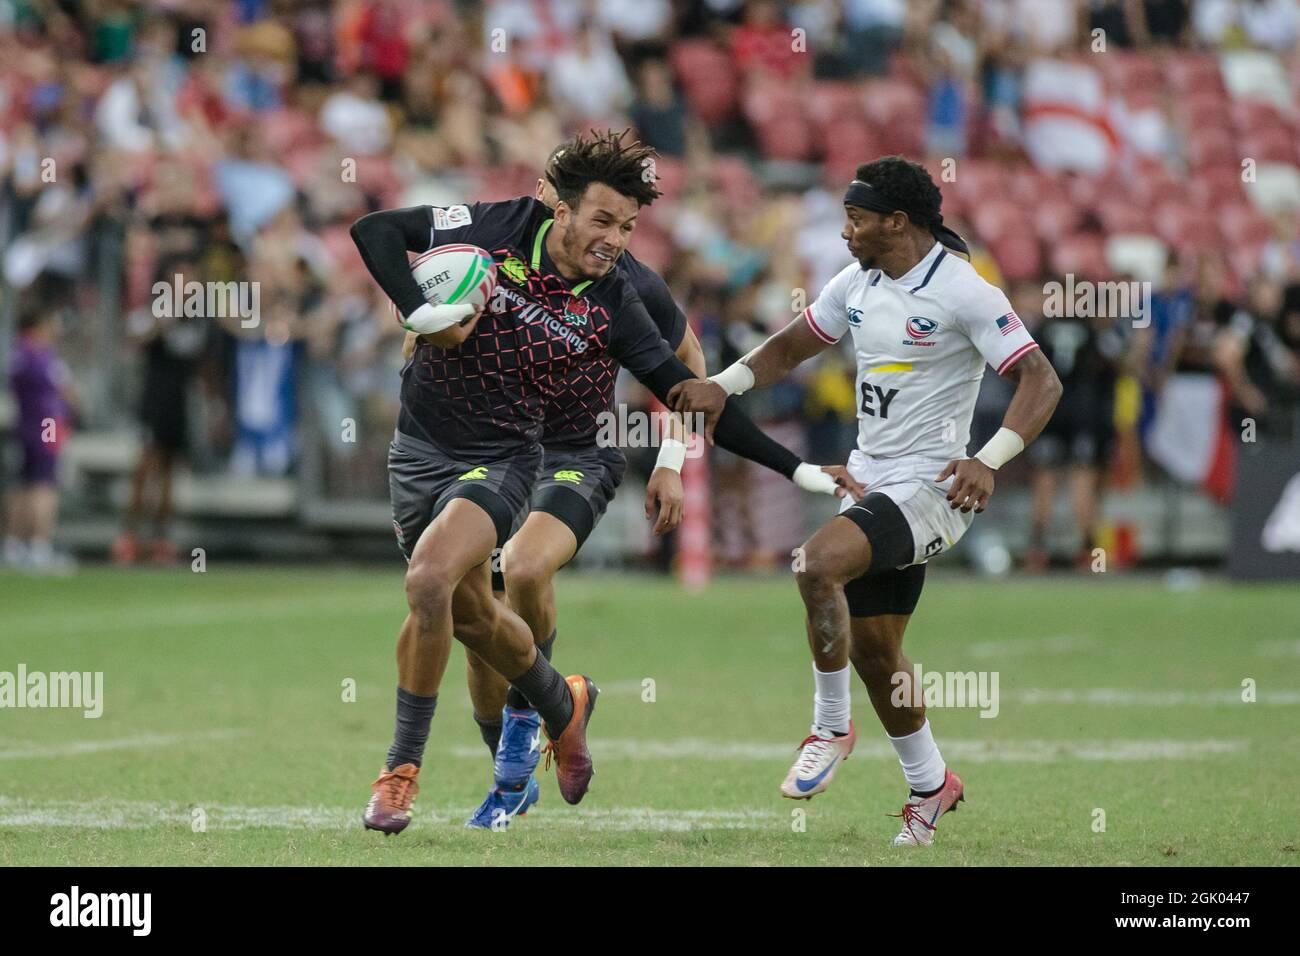 SINGAPORE-APRIL 14: Ryan Olowofela of England 7s Team (blue) in action against Carlin Isles of USA 7s team (white) during the Bronze medal match of HSBC World Rugby Singapore Sevens on April 14, 2019 at National Stadium in Singapore Stock Photo